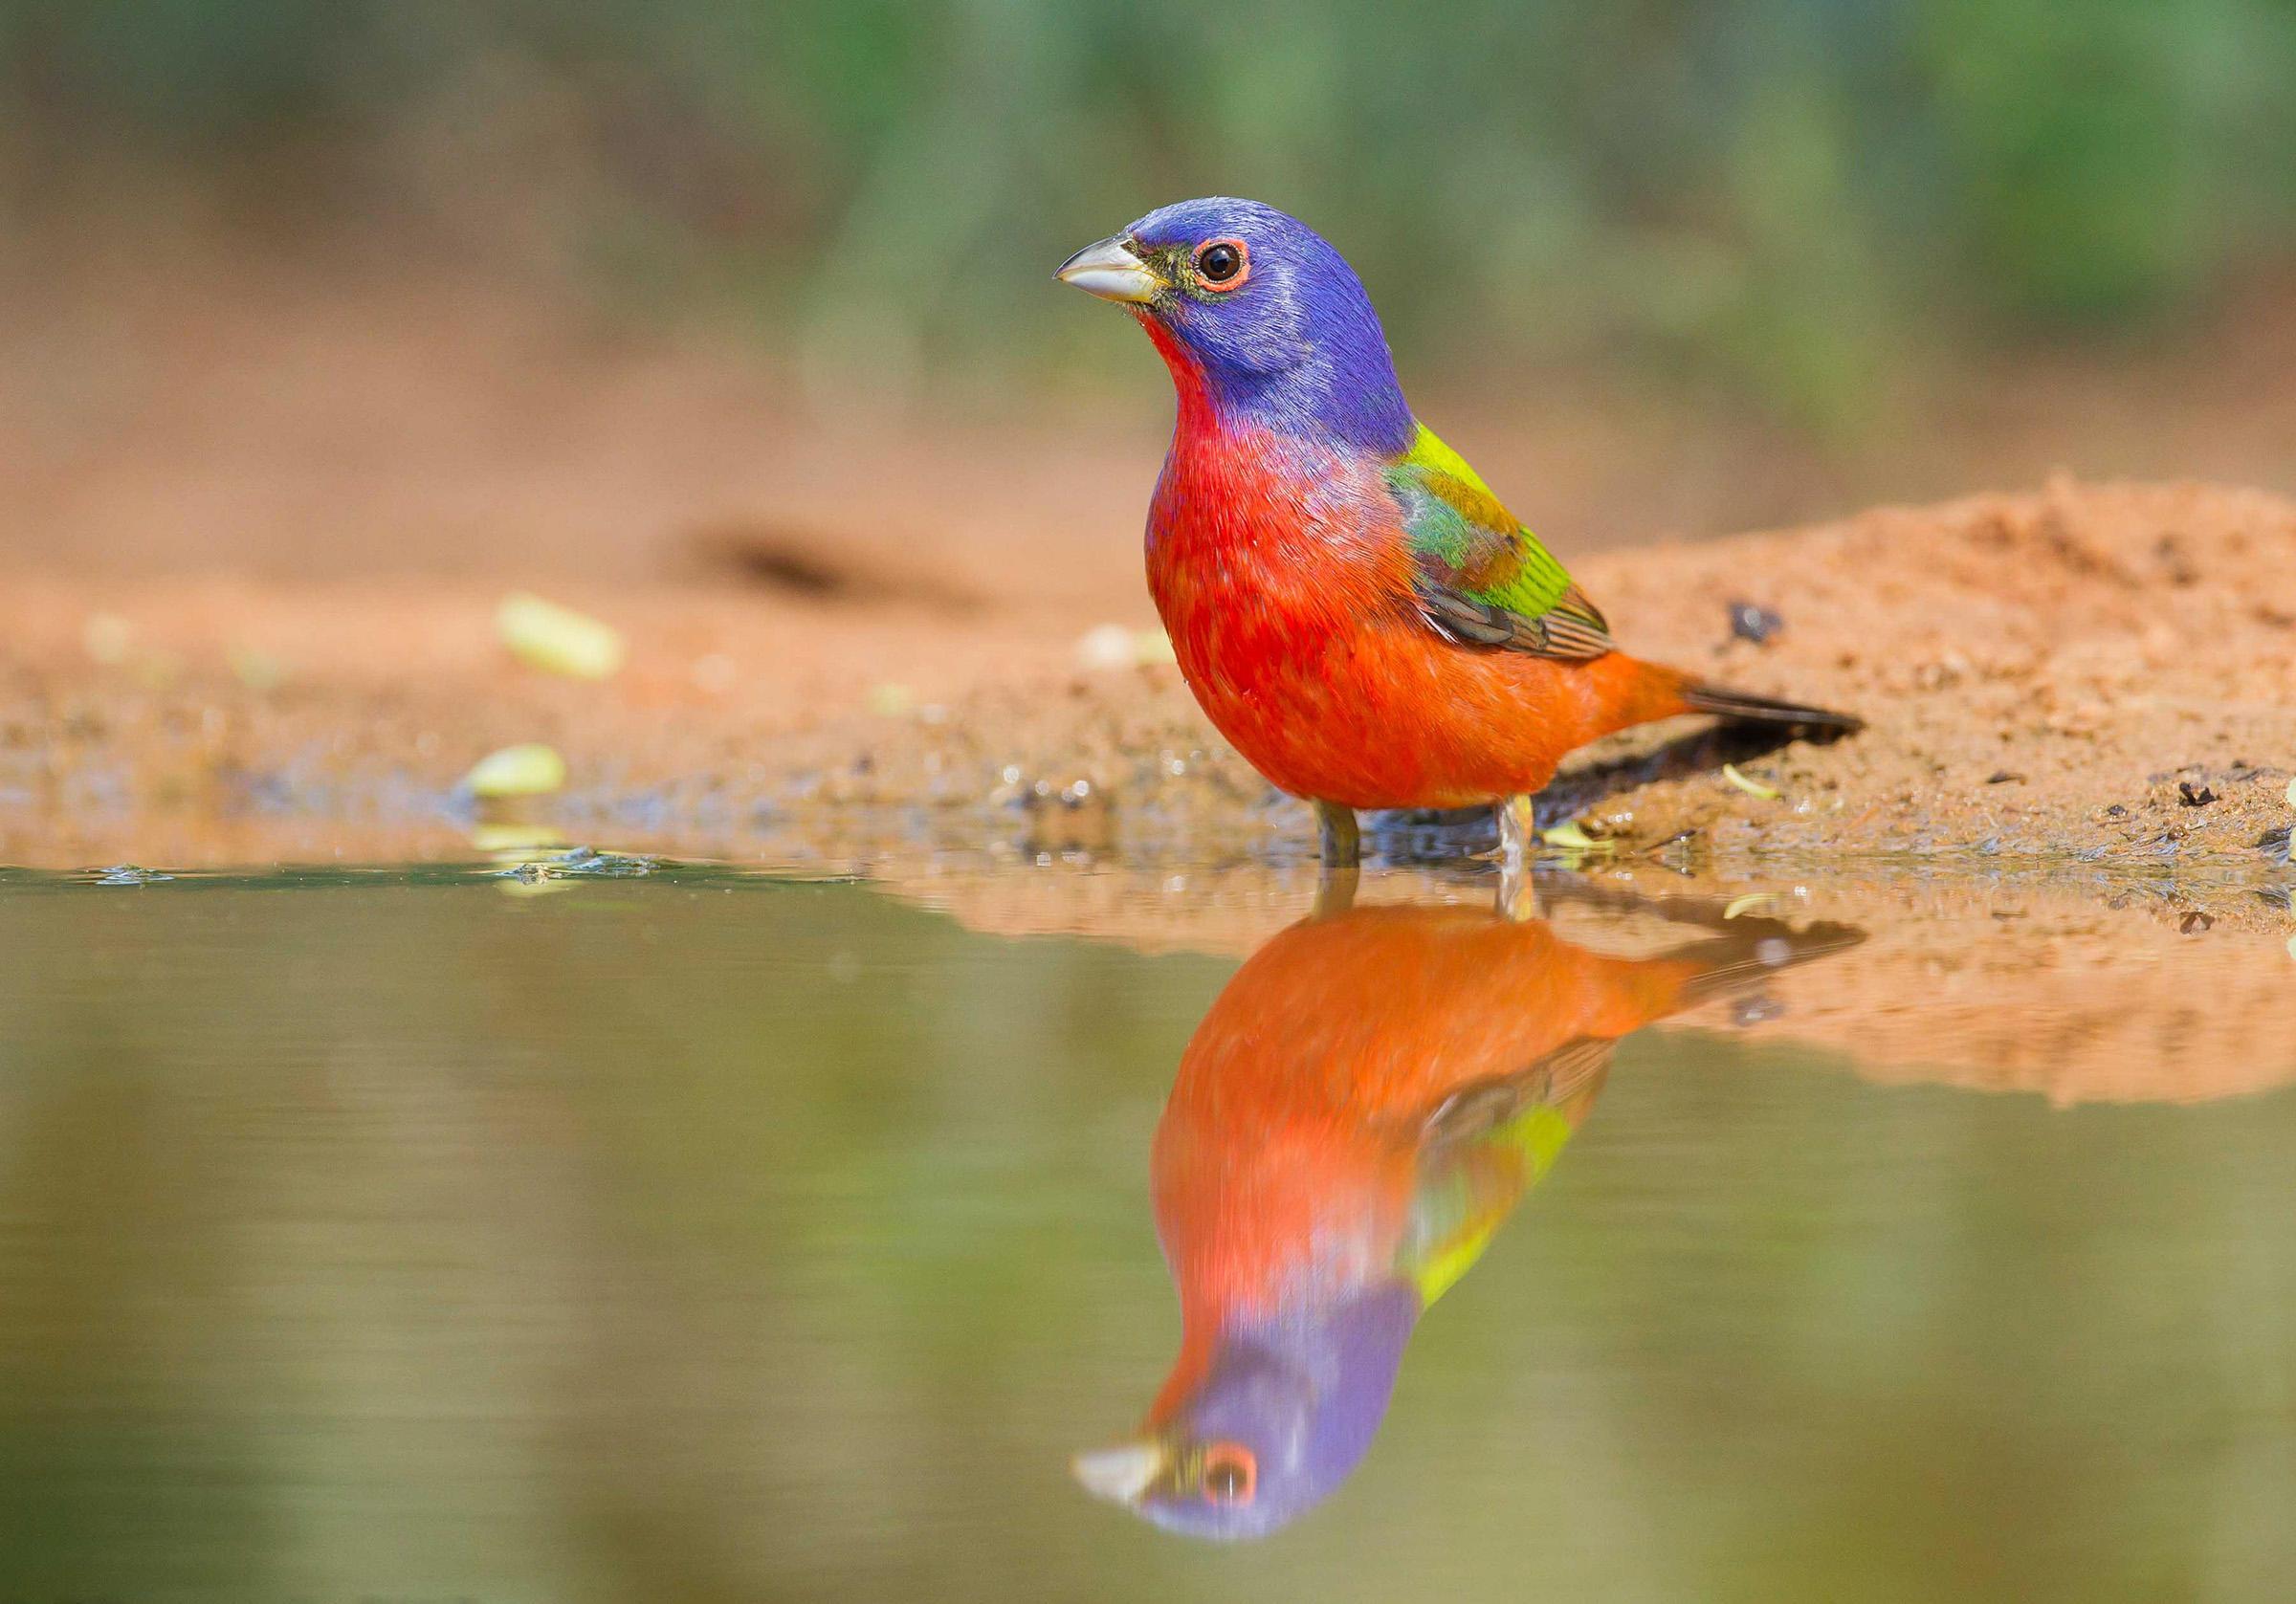 Painted Bunting. Audubon Field Guide